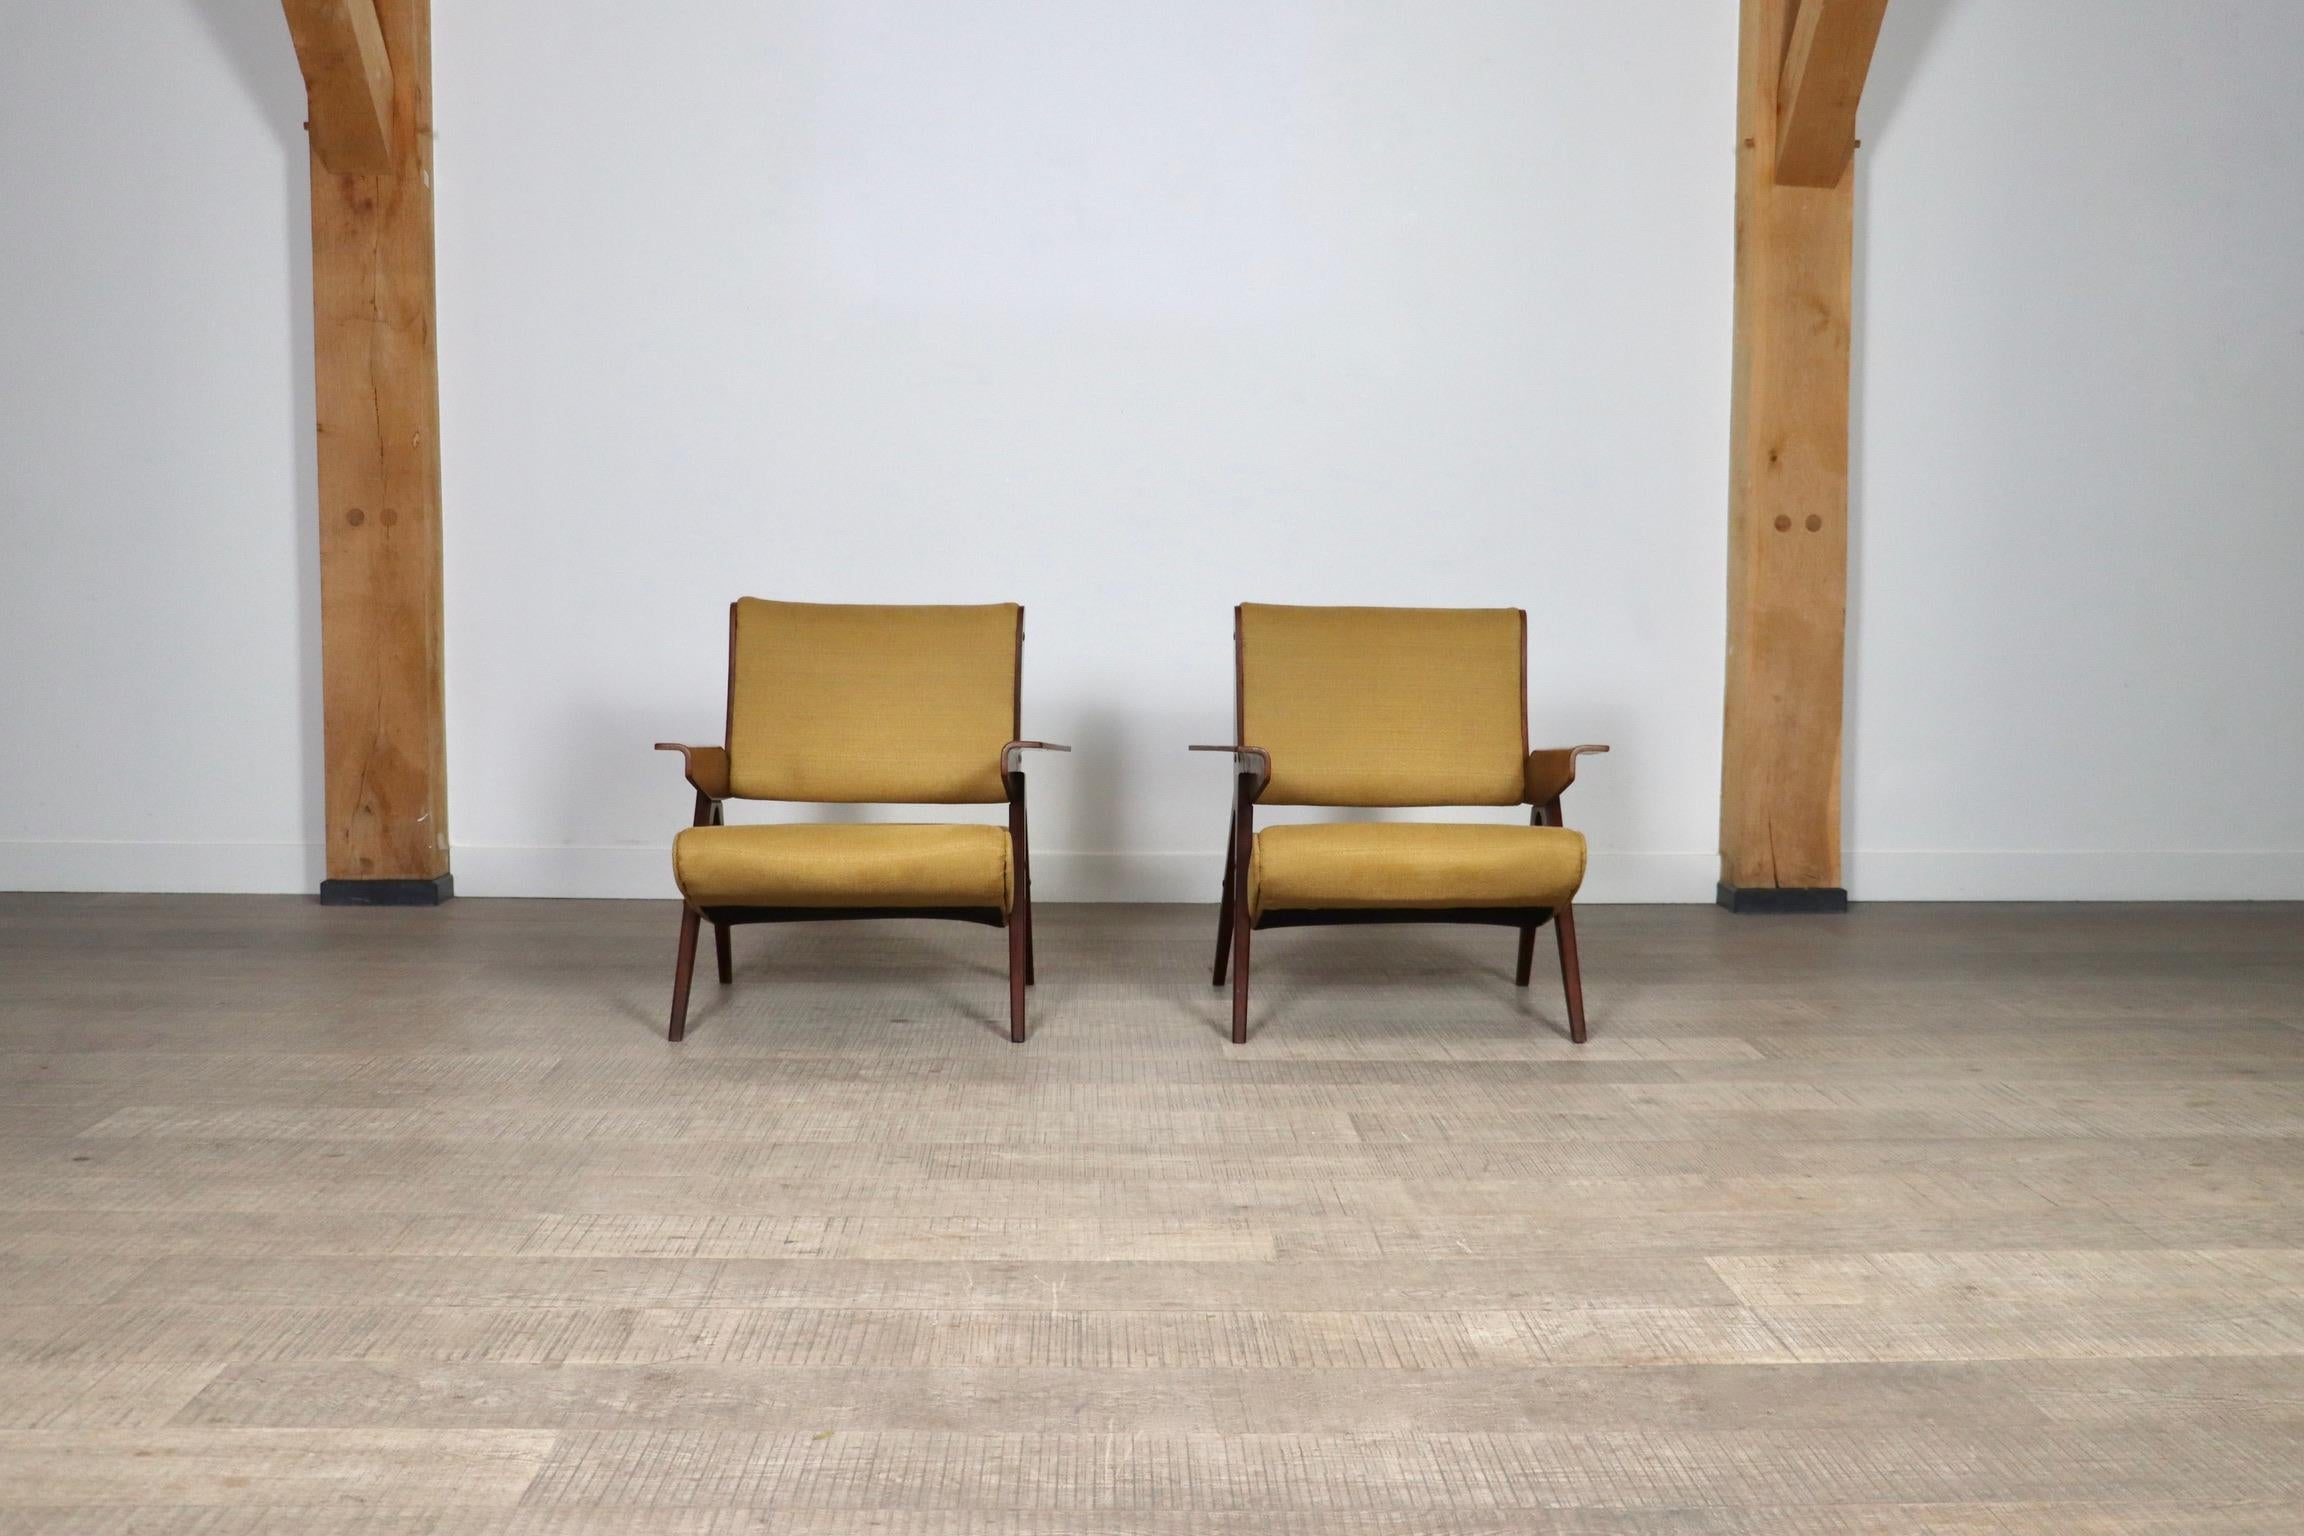 Pair Of Gianfranco Frattini Model 831 Lounge Chairs For Cassina, 1950s For Sale 7